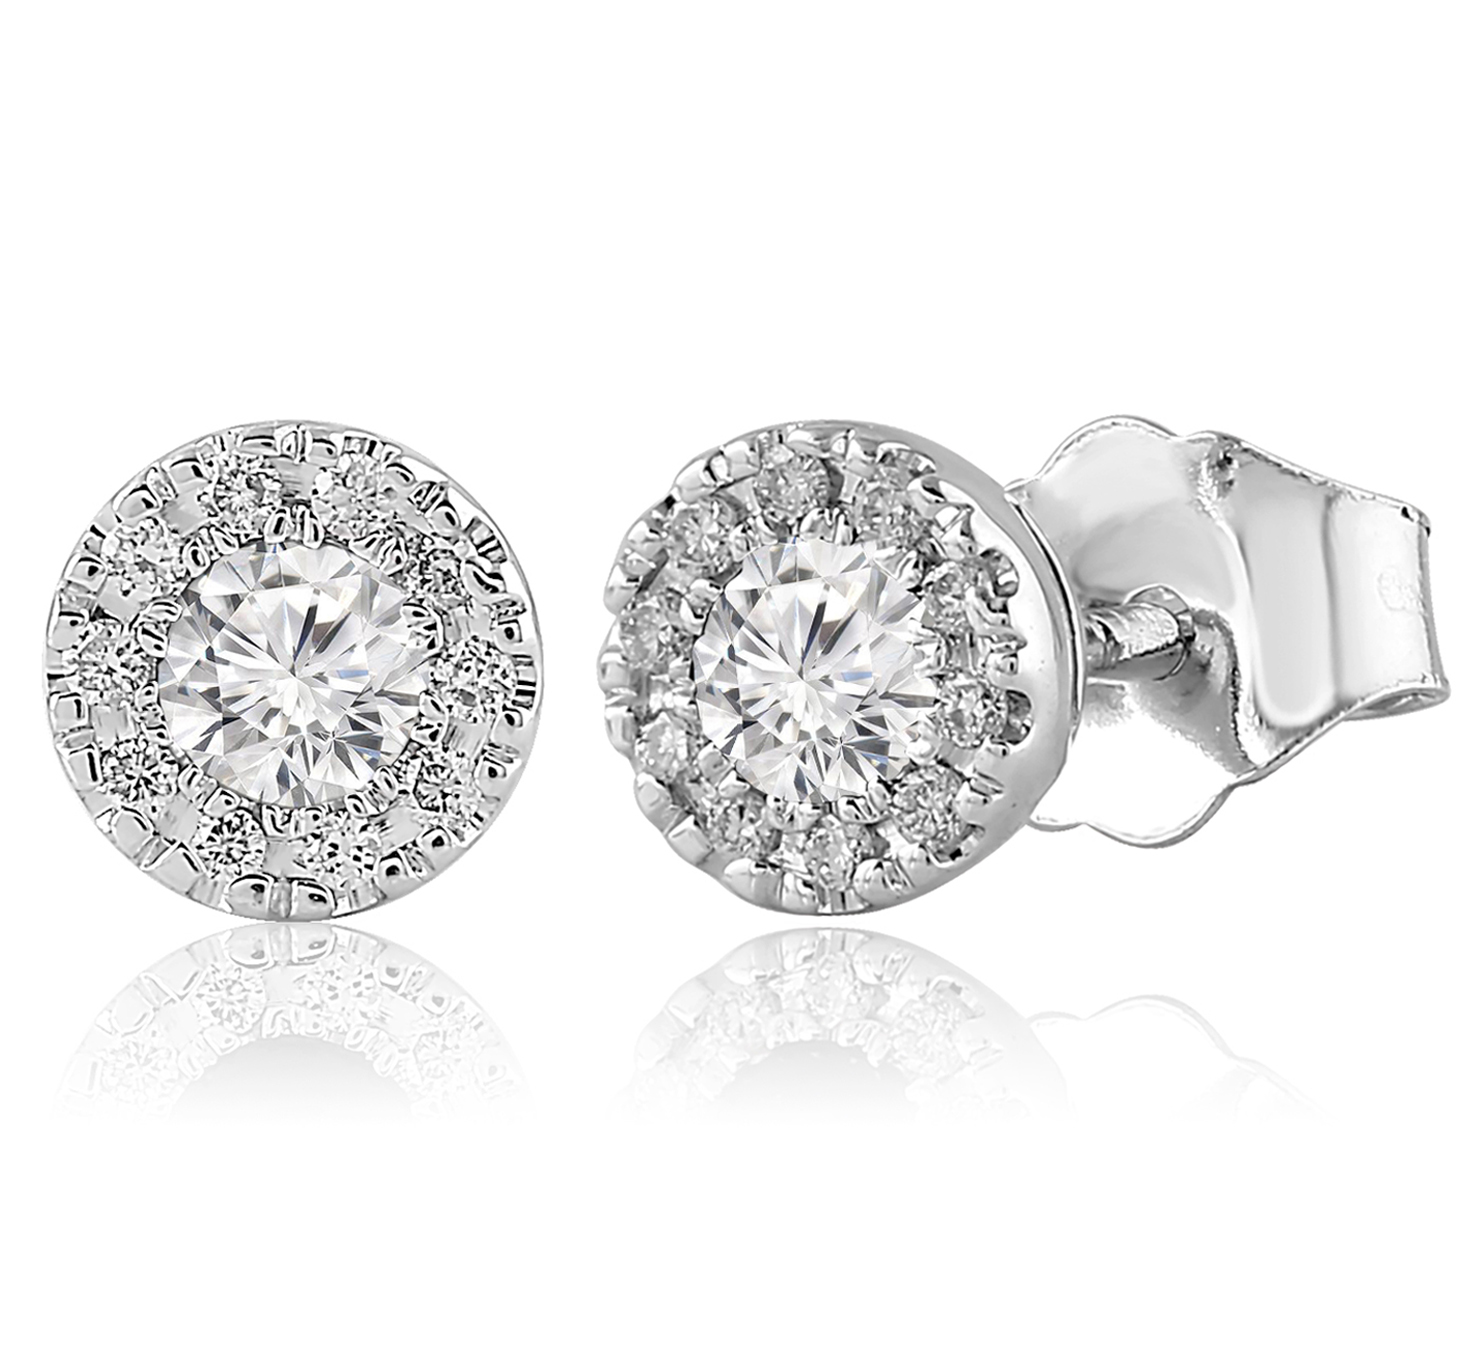 14 karat white gold halo stud Earrings with 22=0.26 total weight round brilliant G I Diamonds